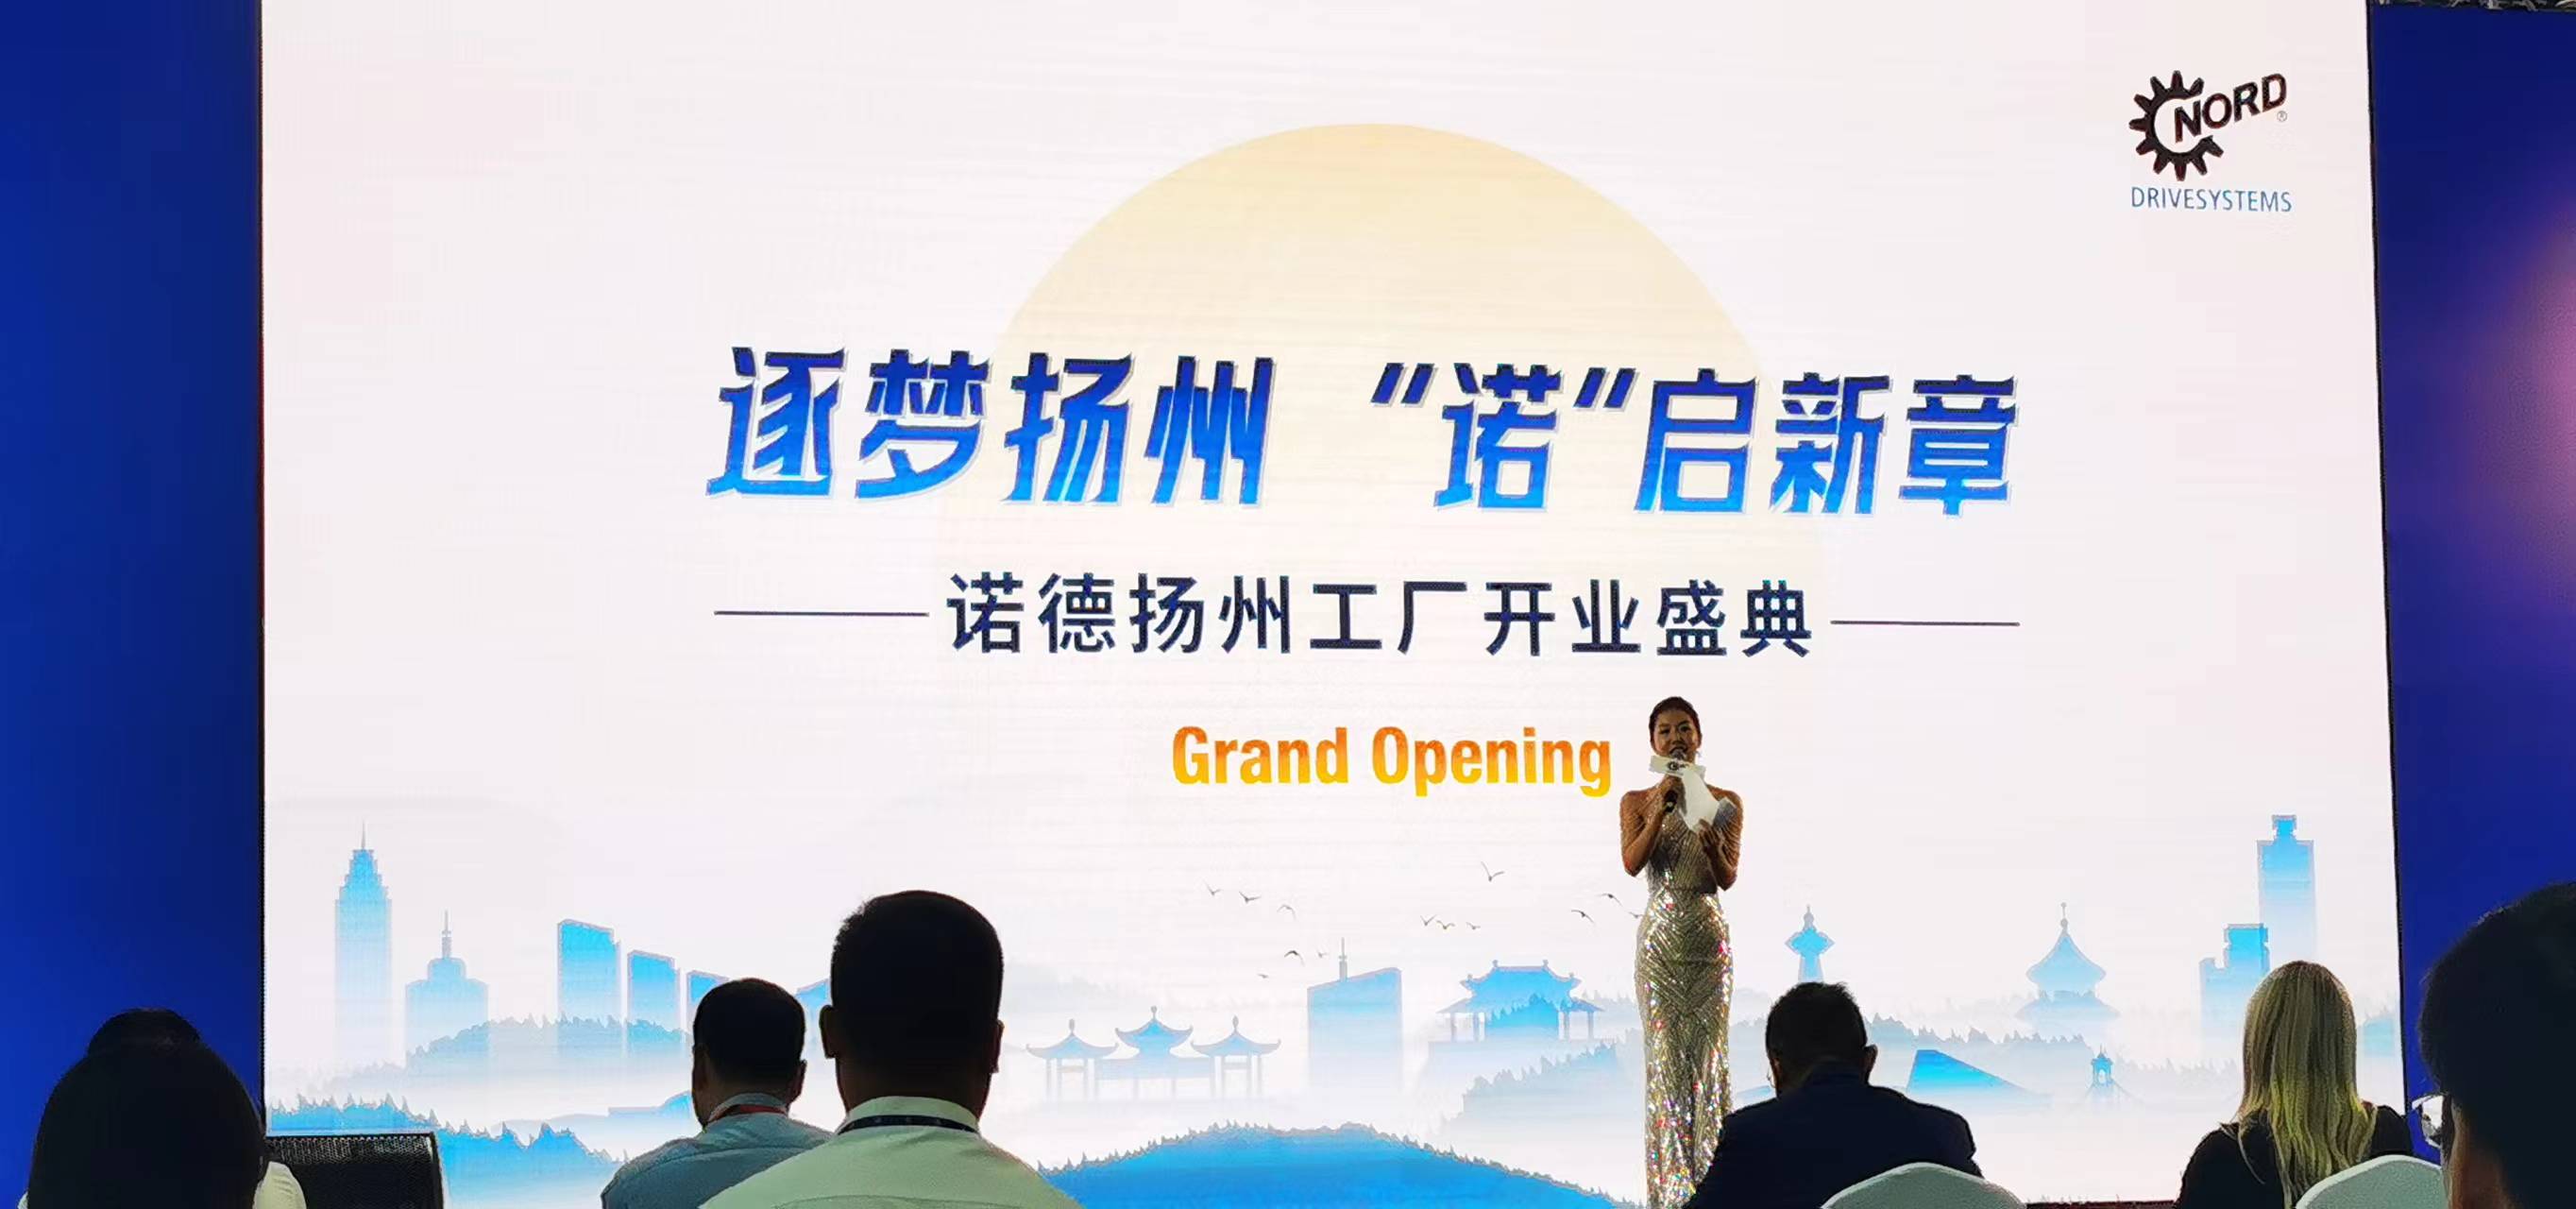 Nord Grand Opening New Factory In Jiansu